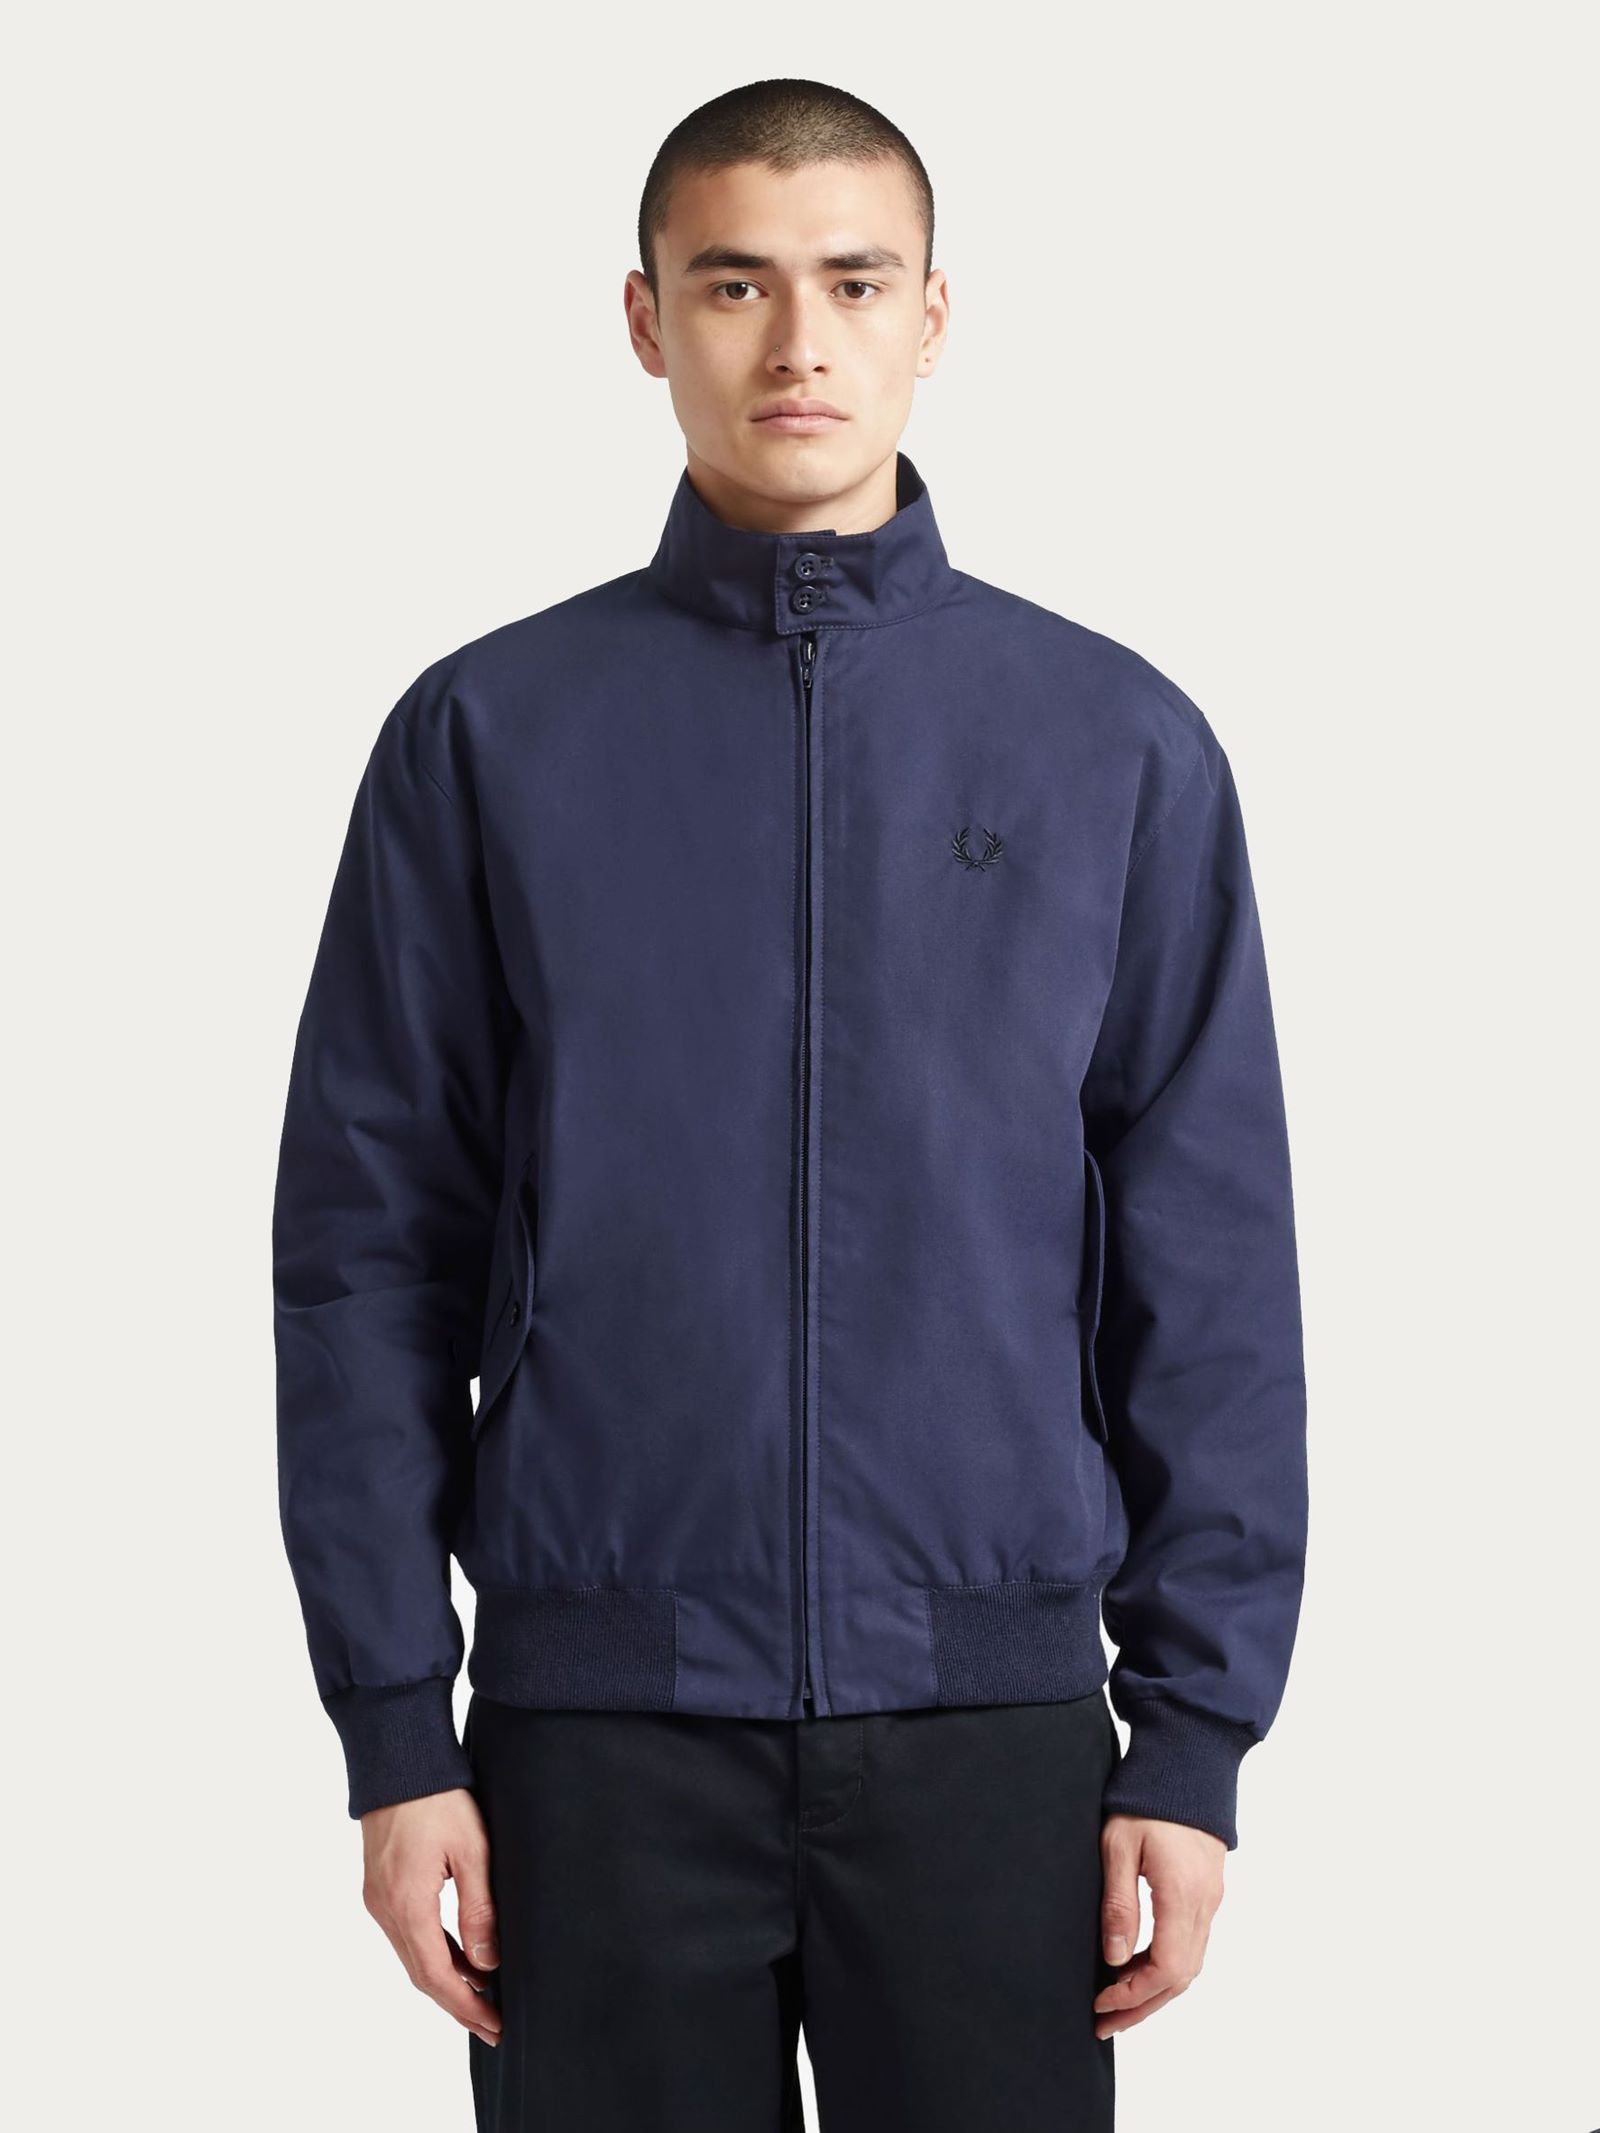 Fred Perry Made In England Men's Harrington Jacket in Navy | Dapper Street